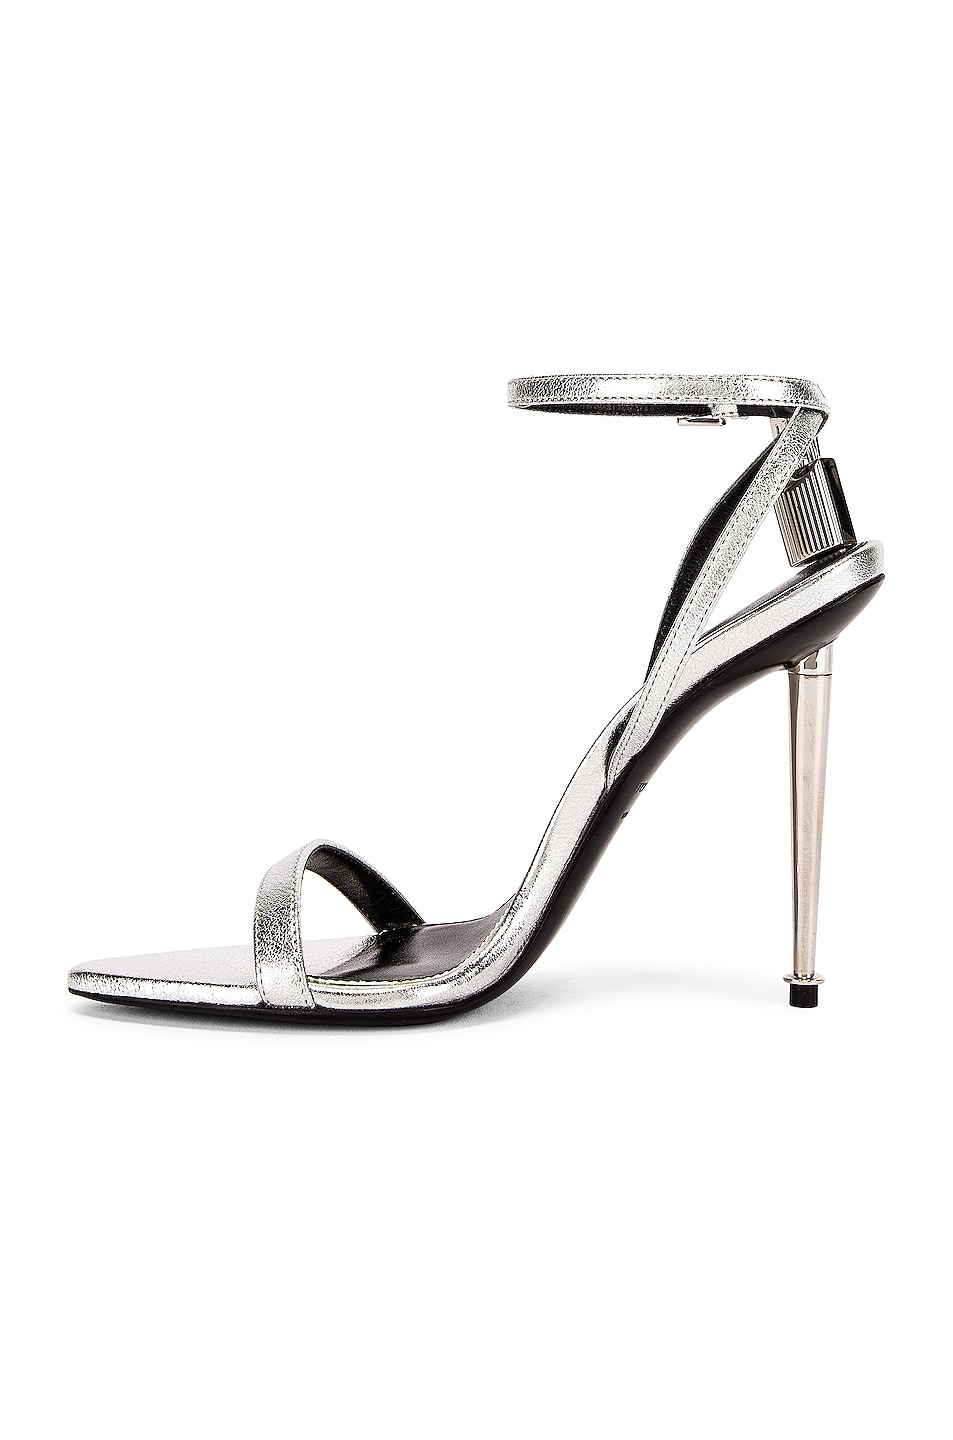 TOM FORD Padlock Pointy Naked Sandal 105 in Silver | FWRD